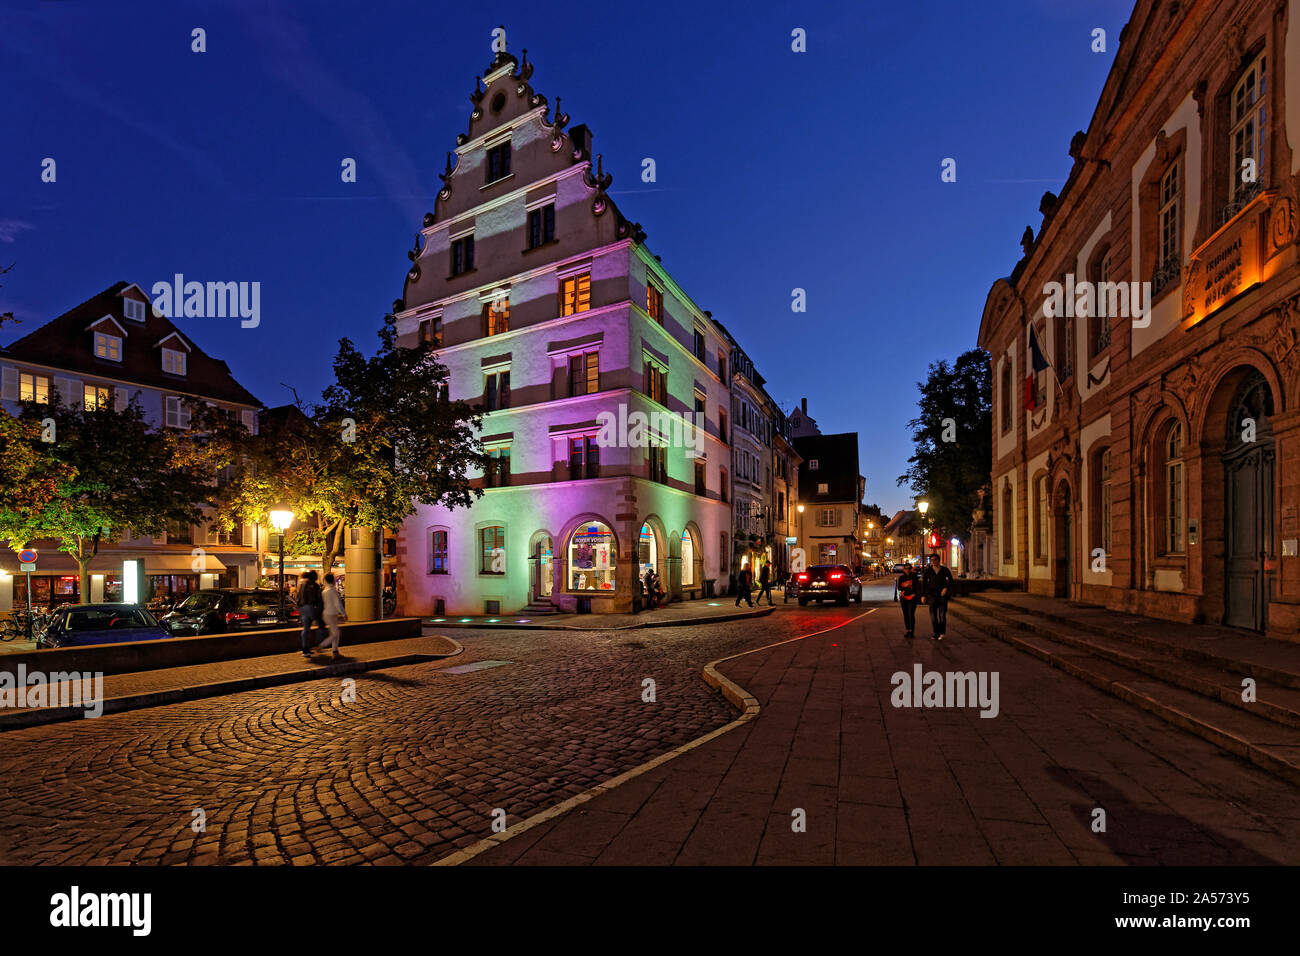 COLMAR, FRANCE, October 11, 2019 : Old typical streets of Colmar at night. The city is renowned for its well-preserved old town and its numerous archi Stock Photo